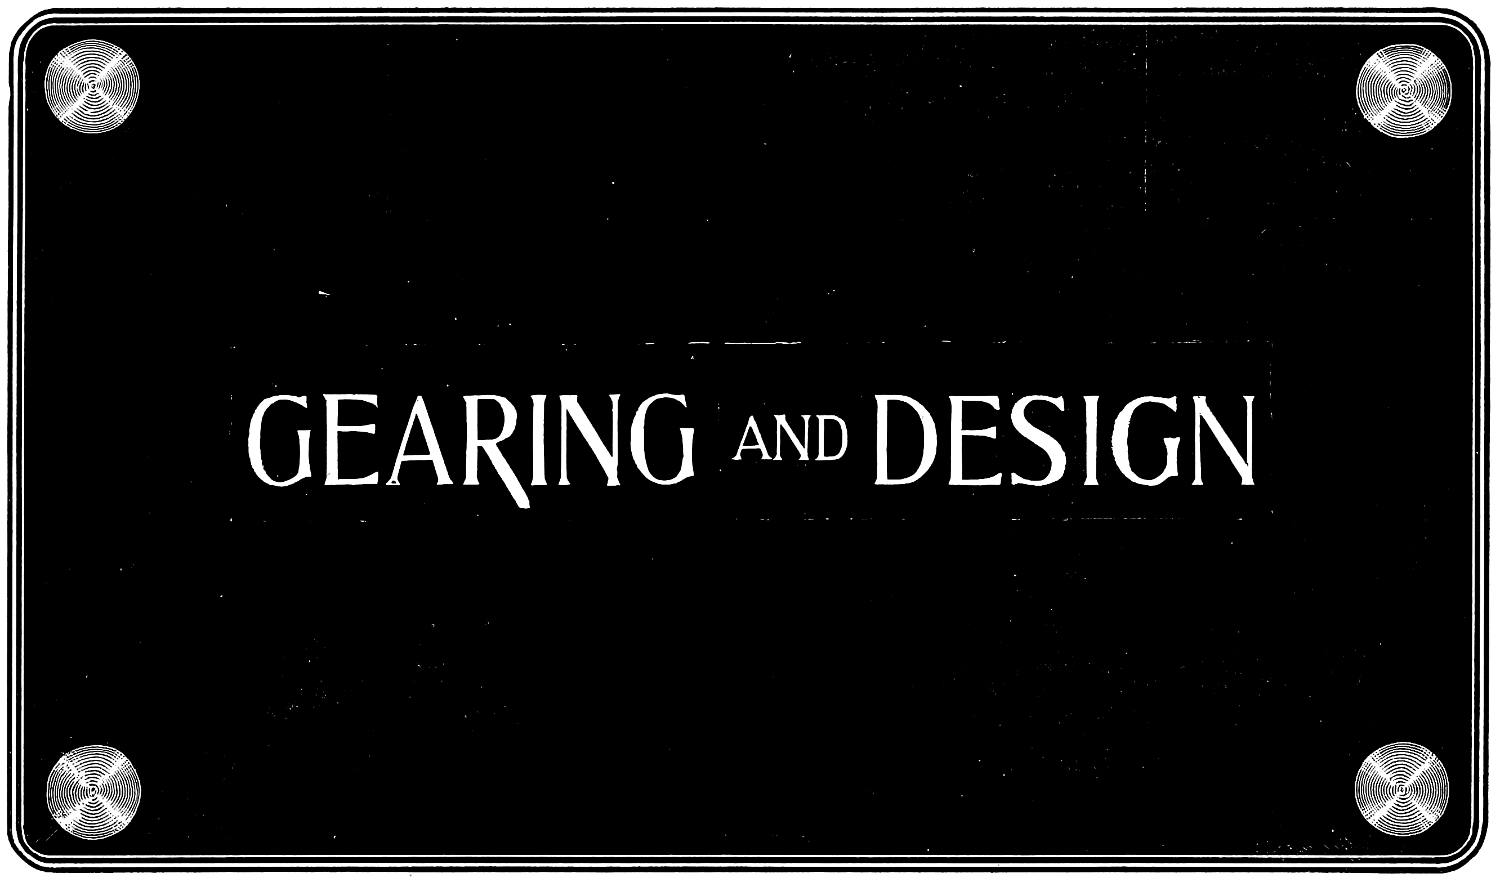 GEARING AND DESIGN